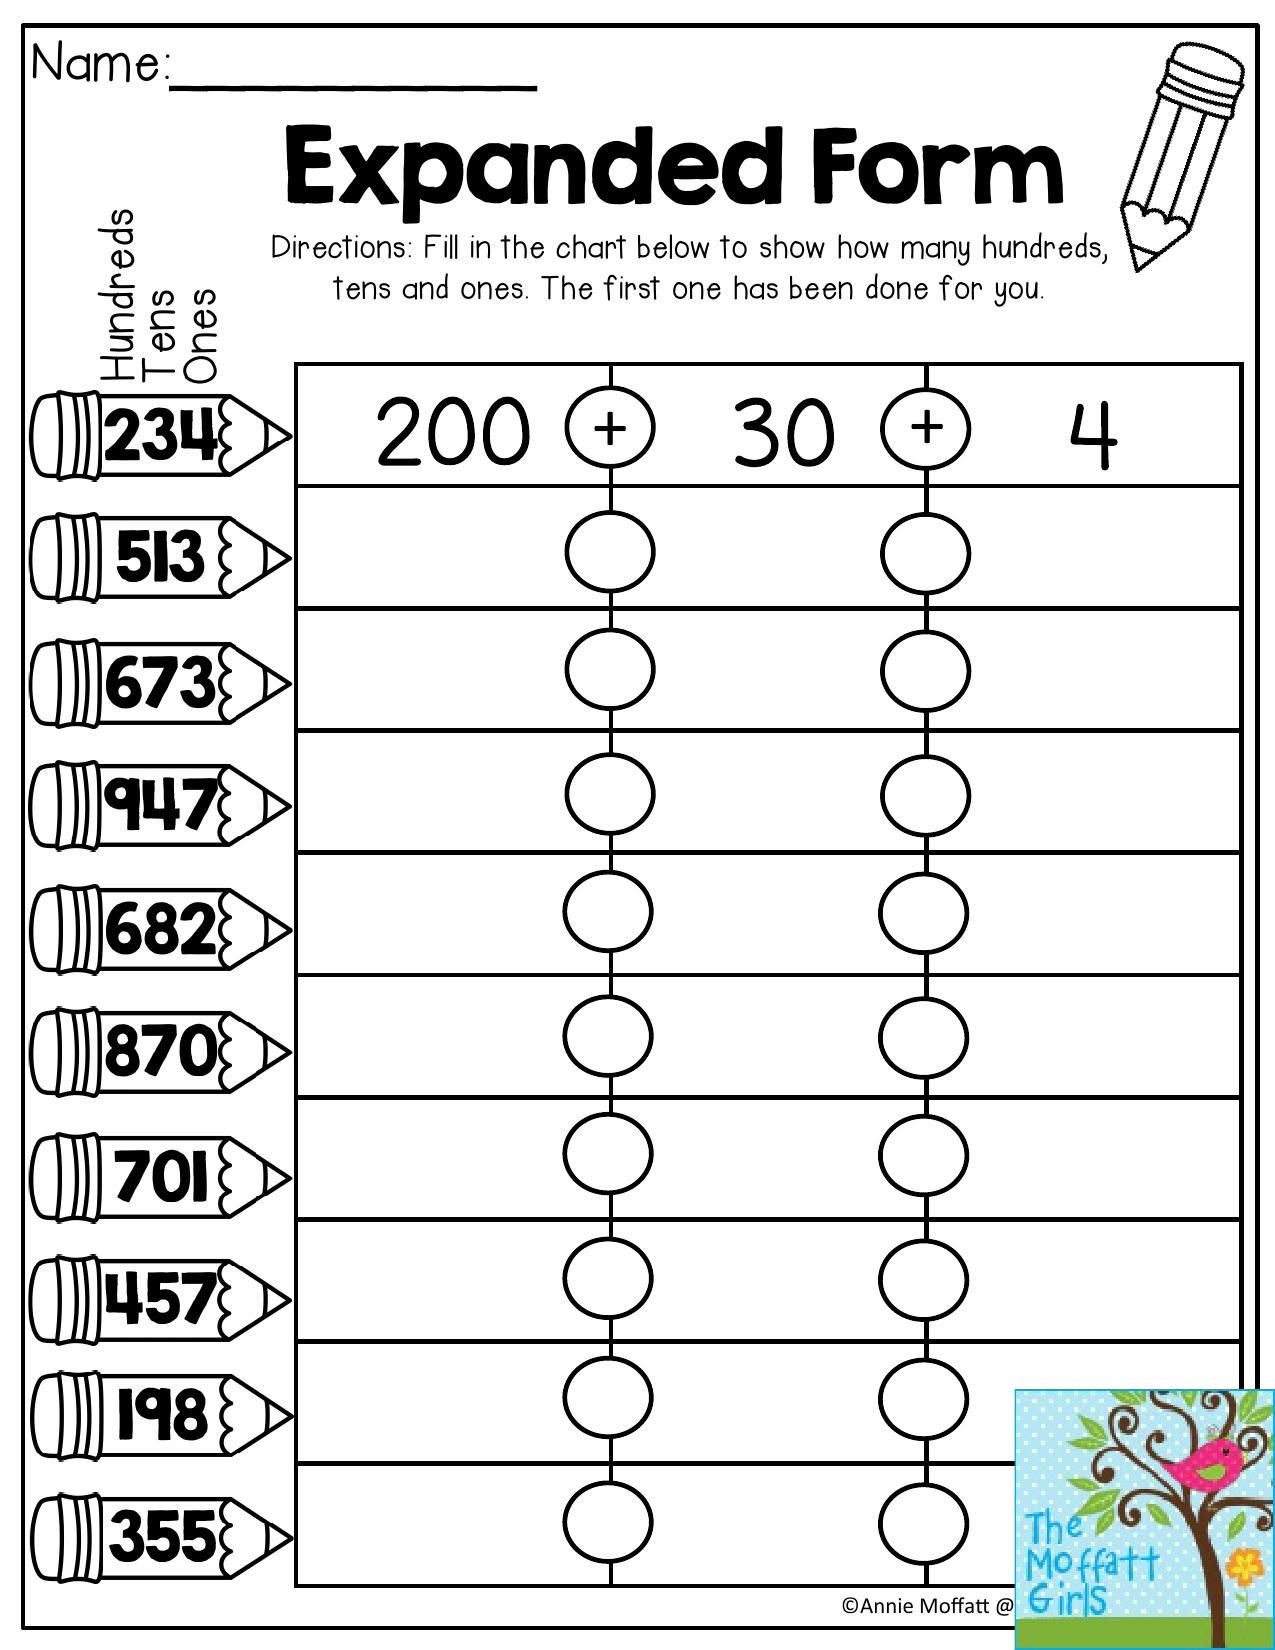 3 Digit Expanded Form Subtraction A Free Printable Expanded Notation Worksheets Free Printable